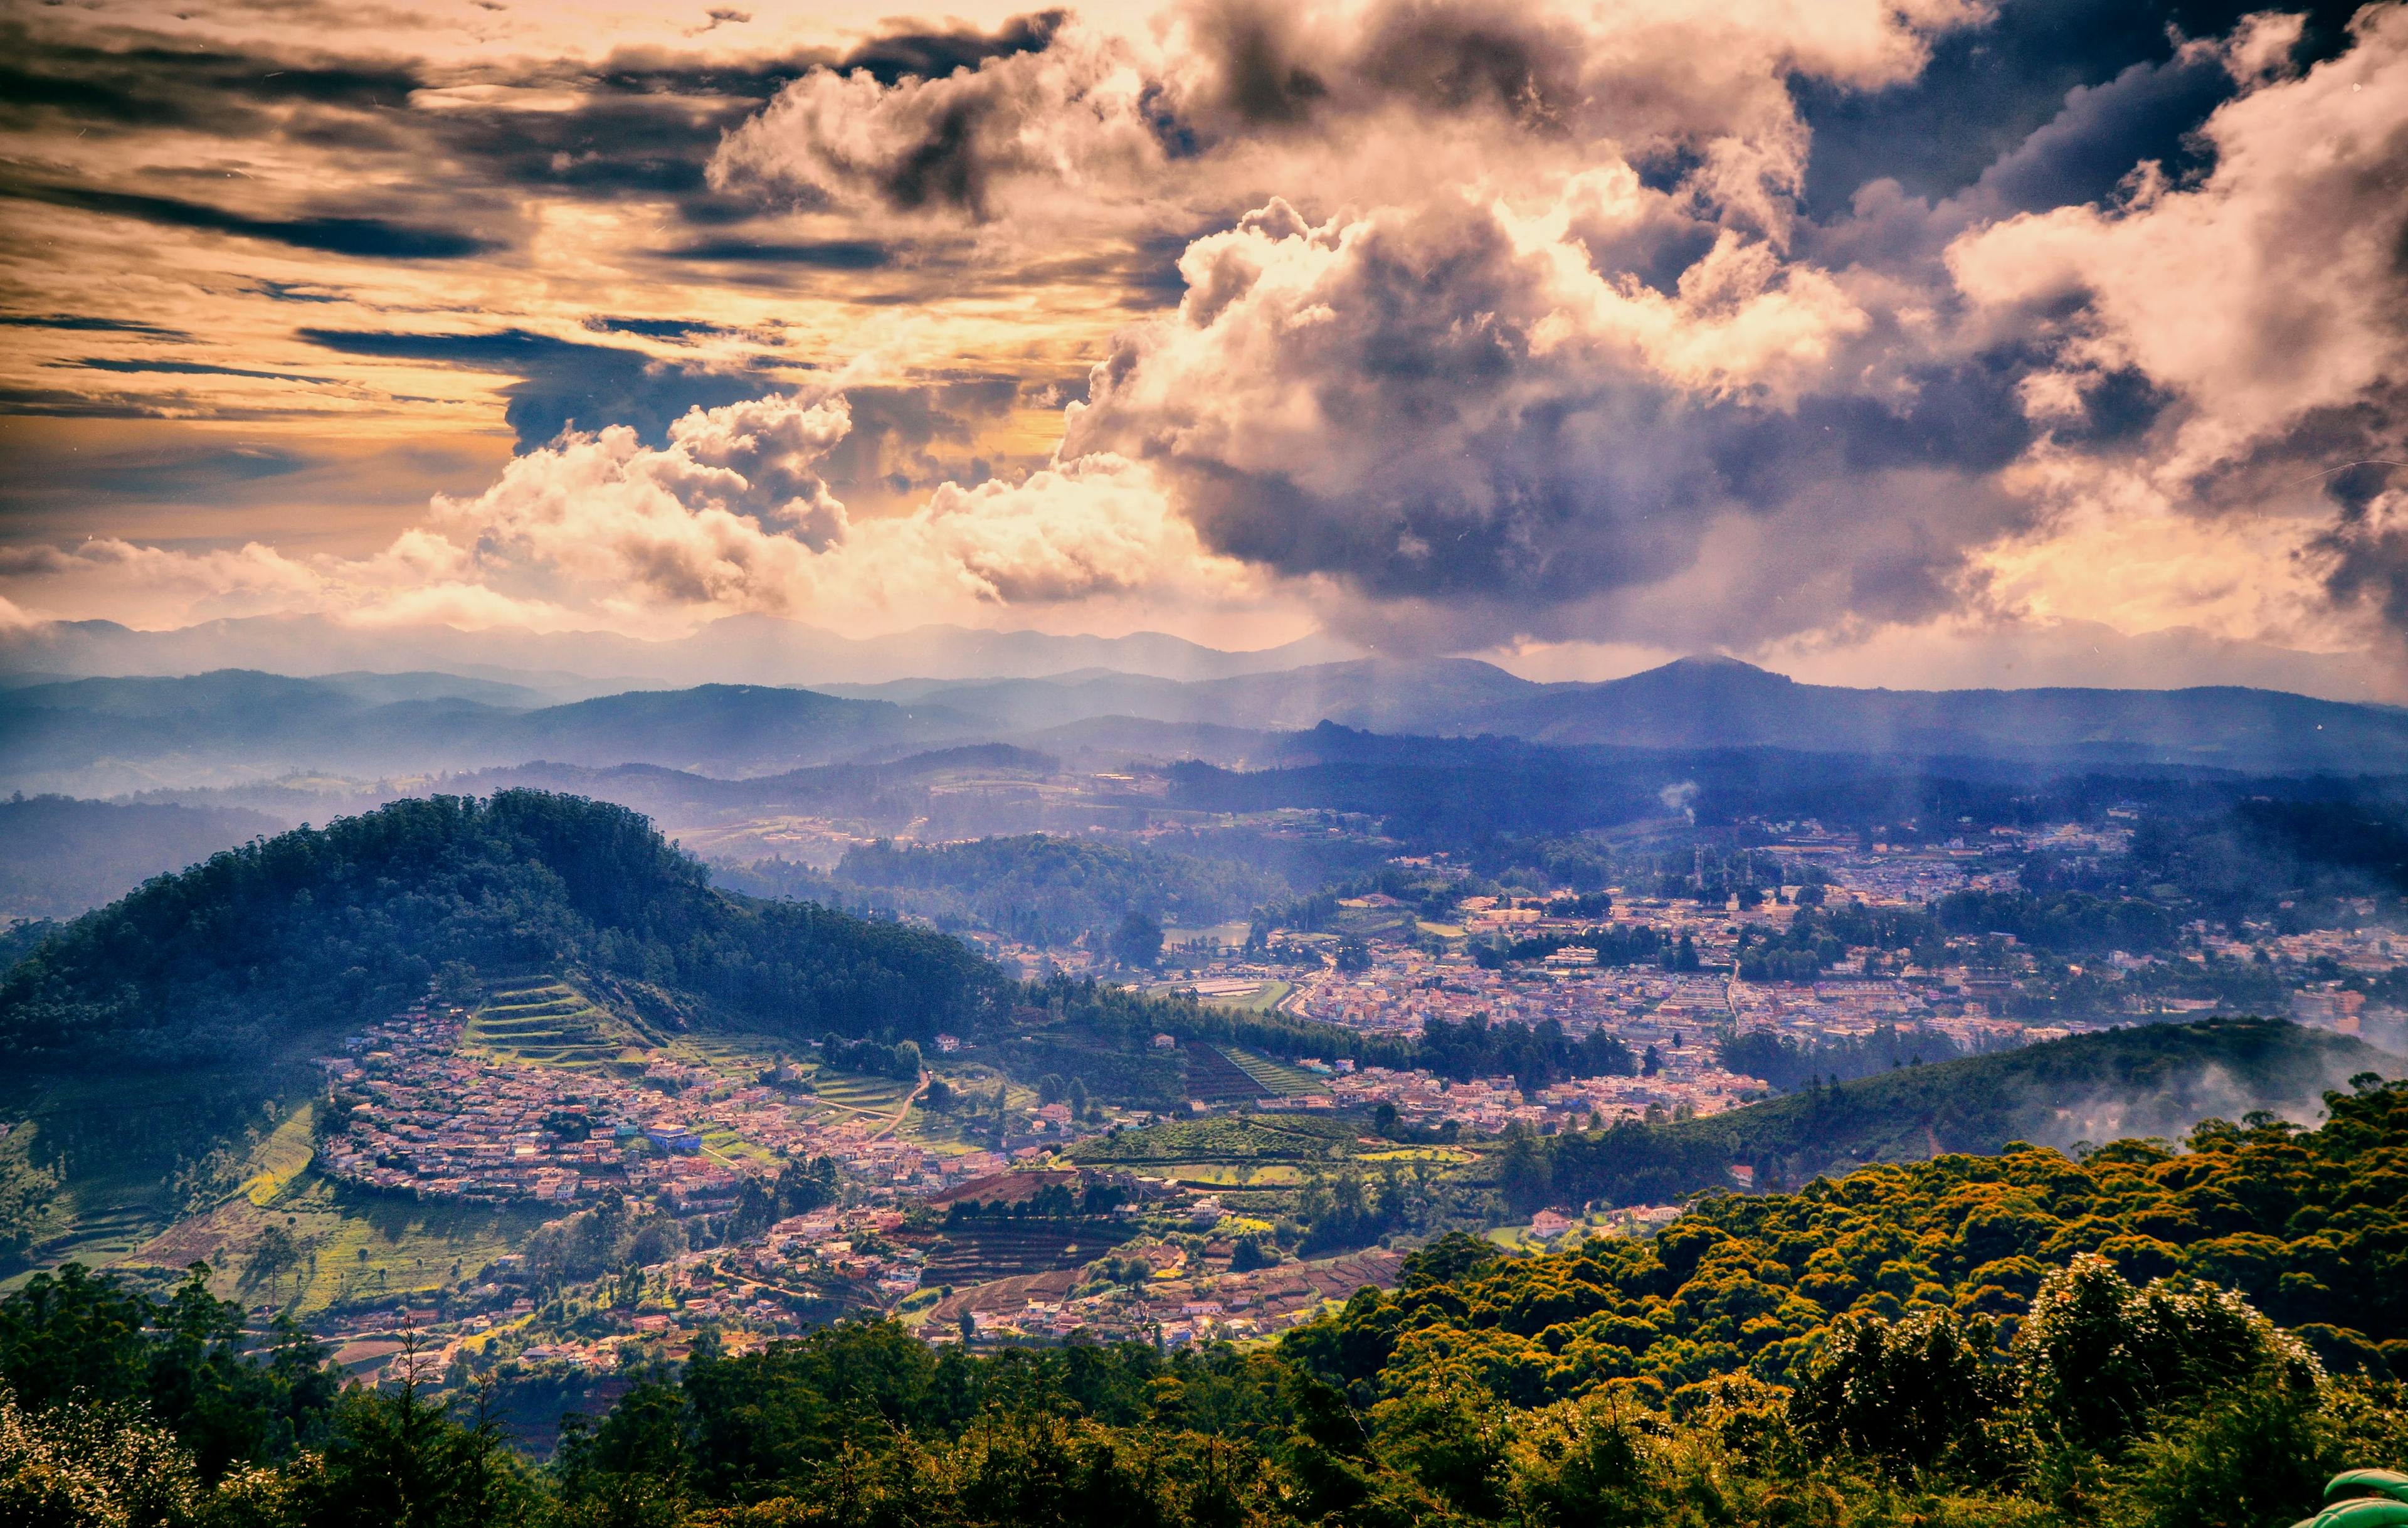 Cloudy Peaks Harmony: Ooty Backpacking Tour with Stunning Sunlit Village Scene